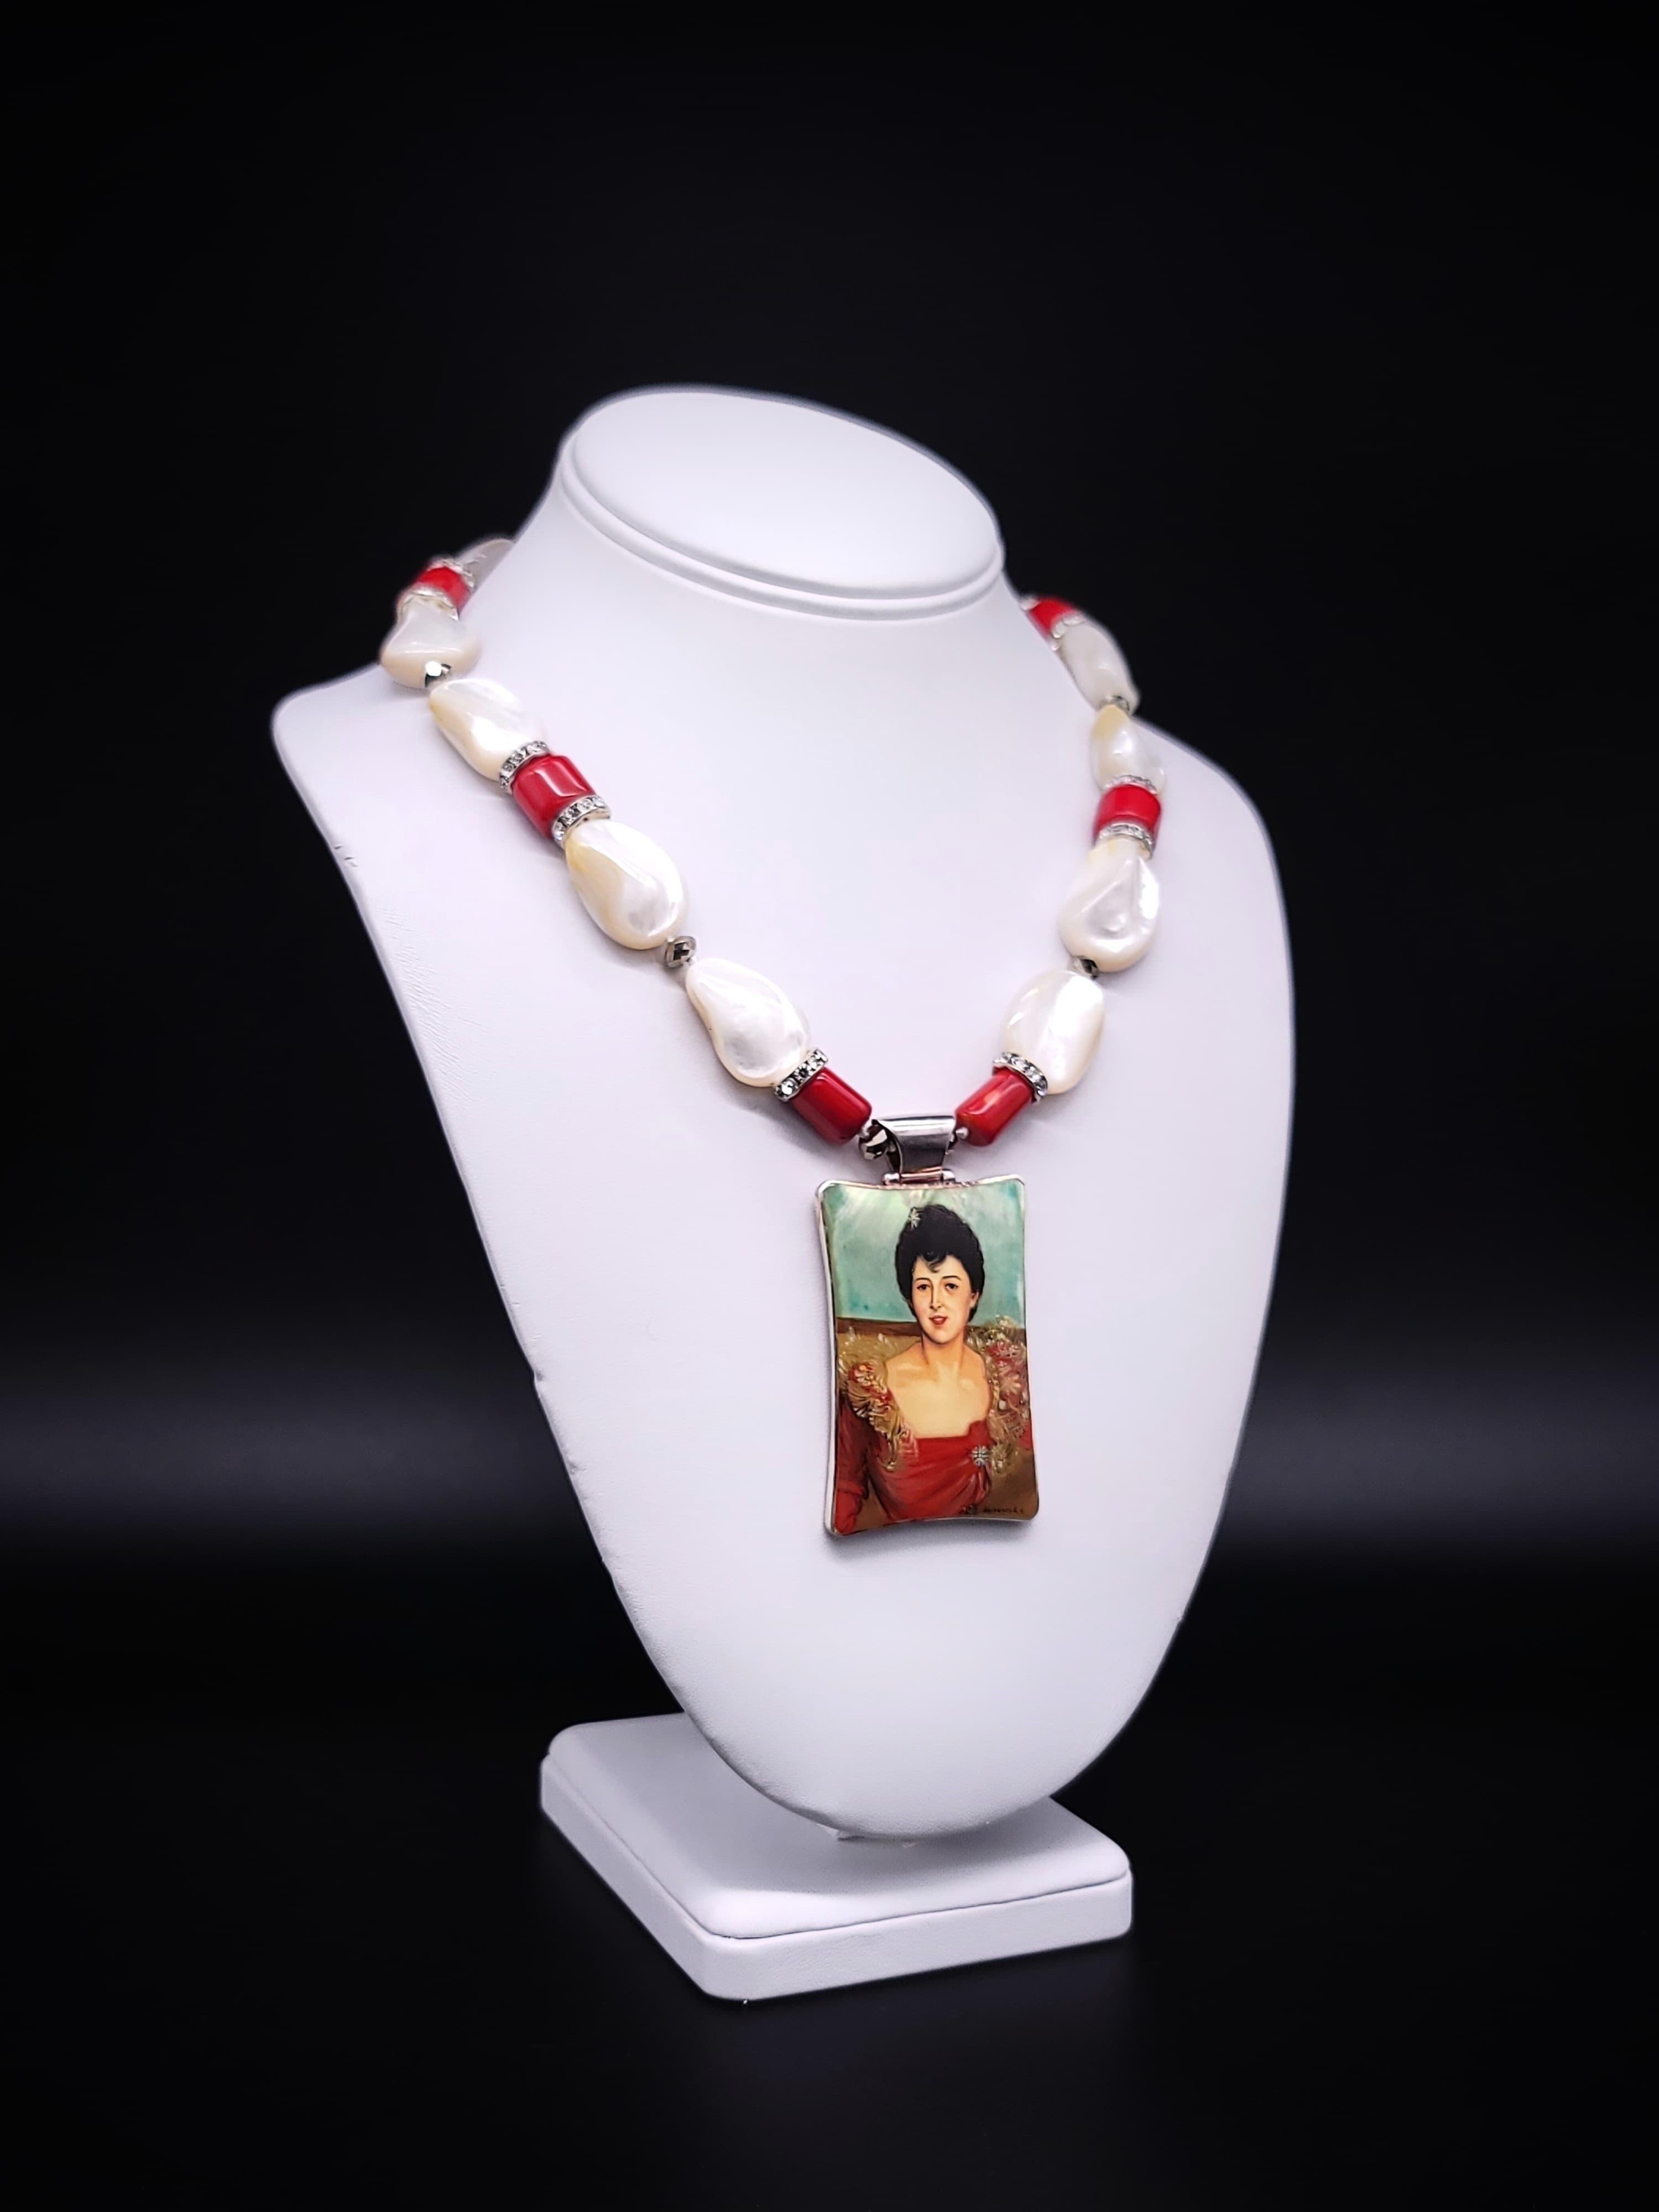 One-of-a-Kind

Introducing a truly captivating and sophisticated jewelry piece - a necklace adorned with lustrous mother-of-pearl beads elegantly accented with coral, and a mesmerizing pendant featuring a beautiful image of Mrs. Hugh